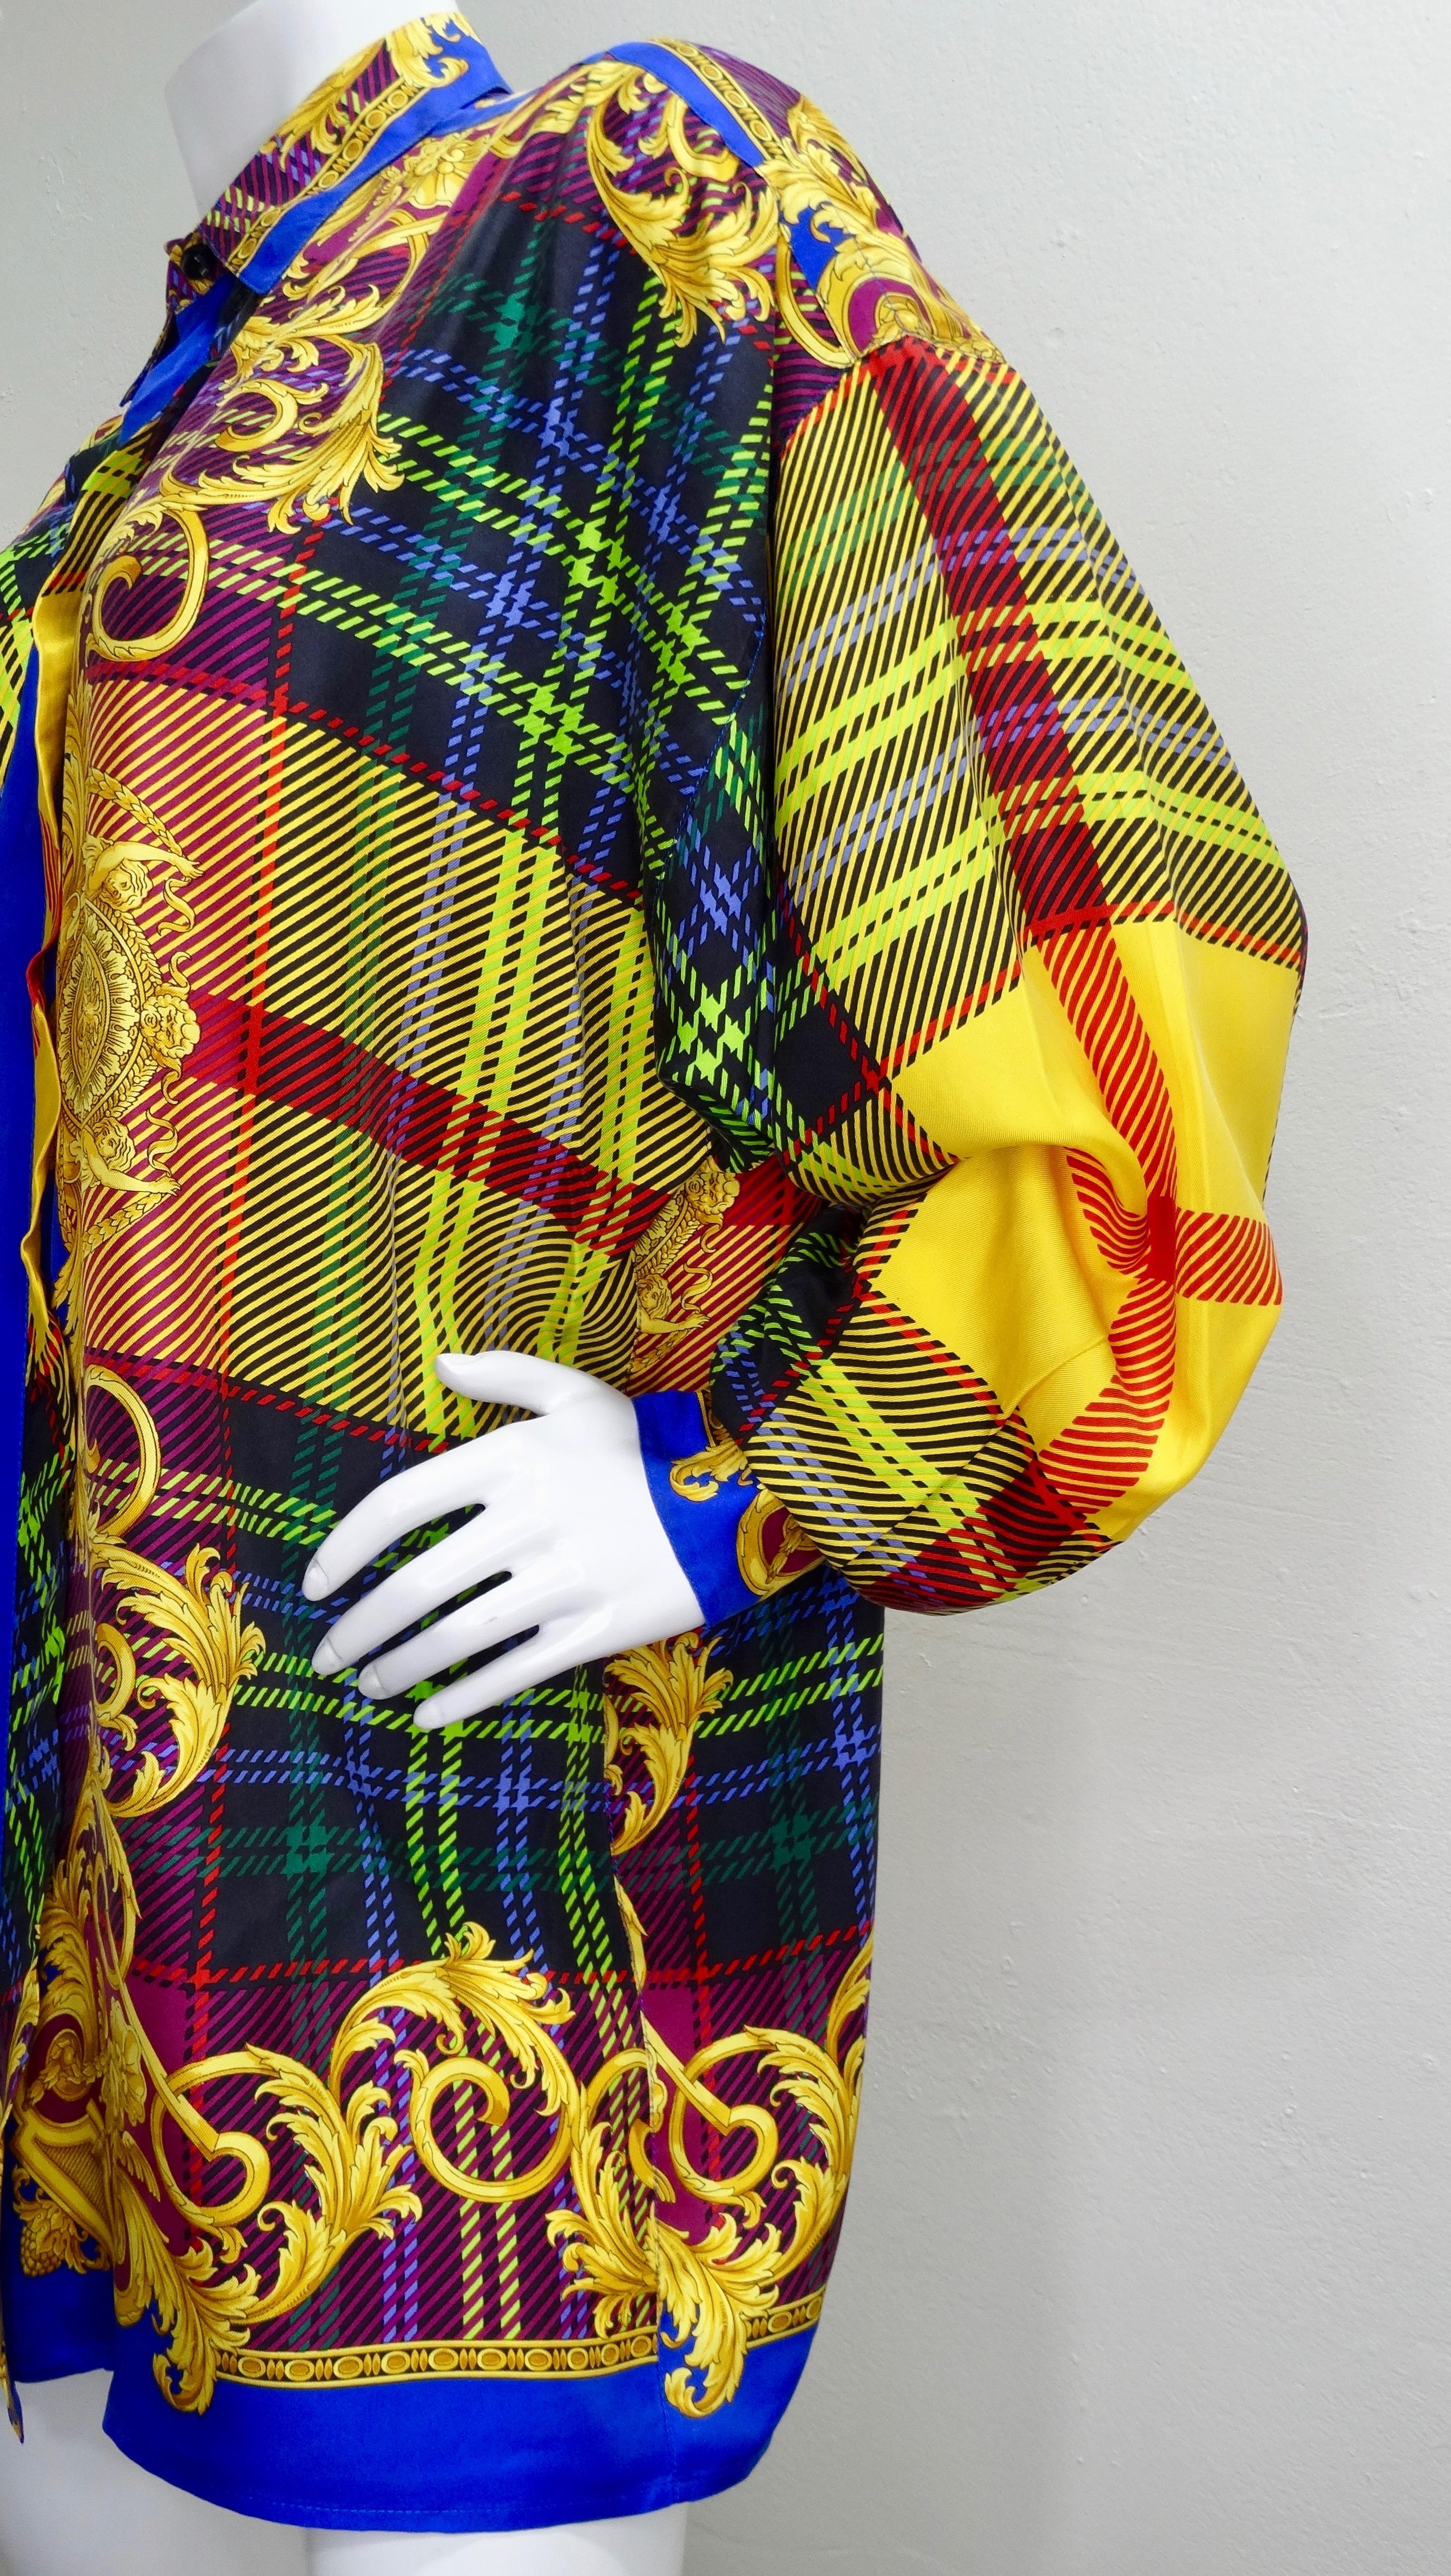 Gianni Versace 1990s Multi-Colored Plaid Silk Shirt  For Sale 3